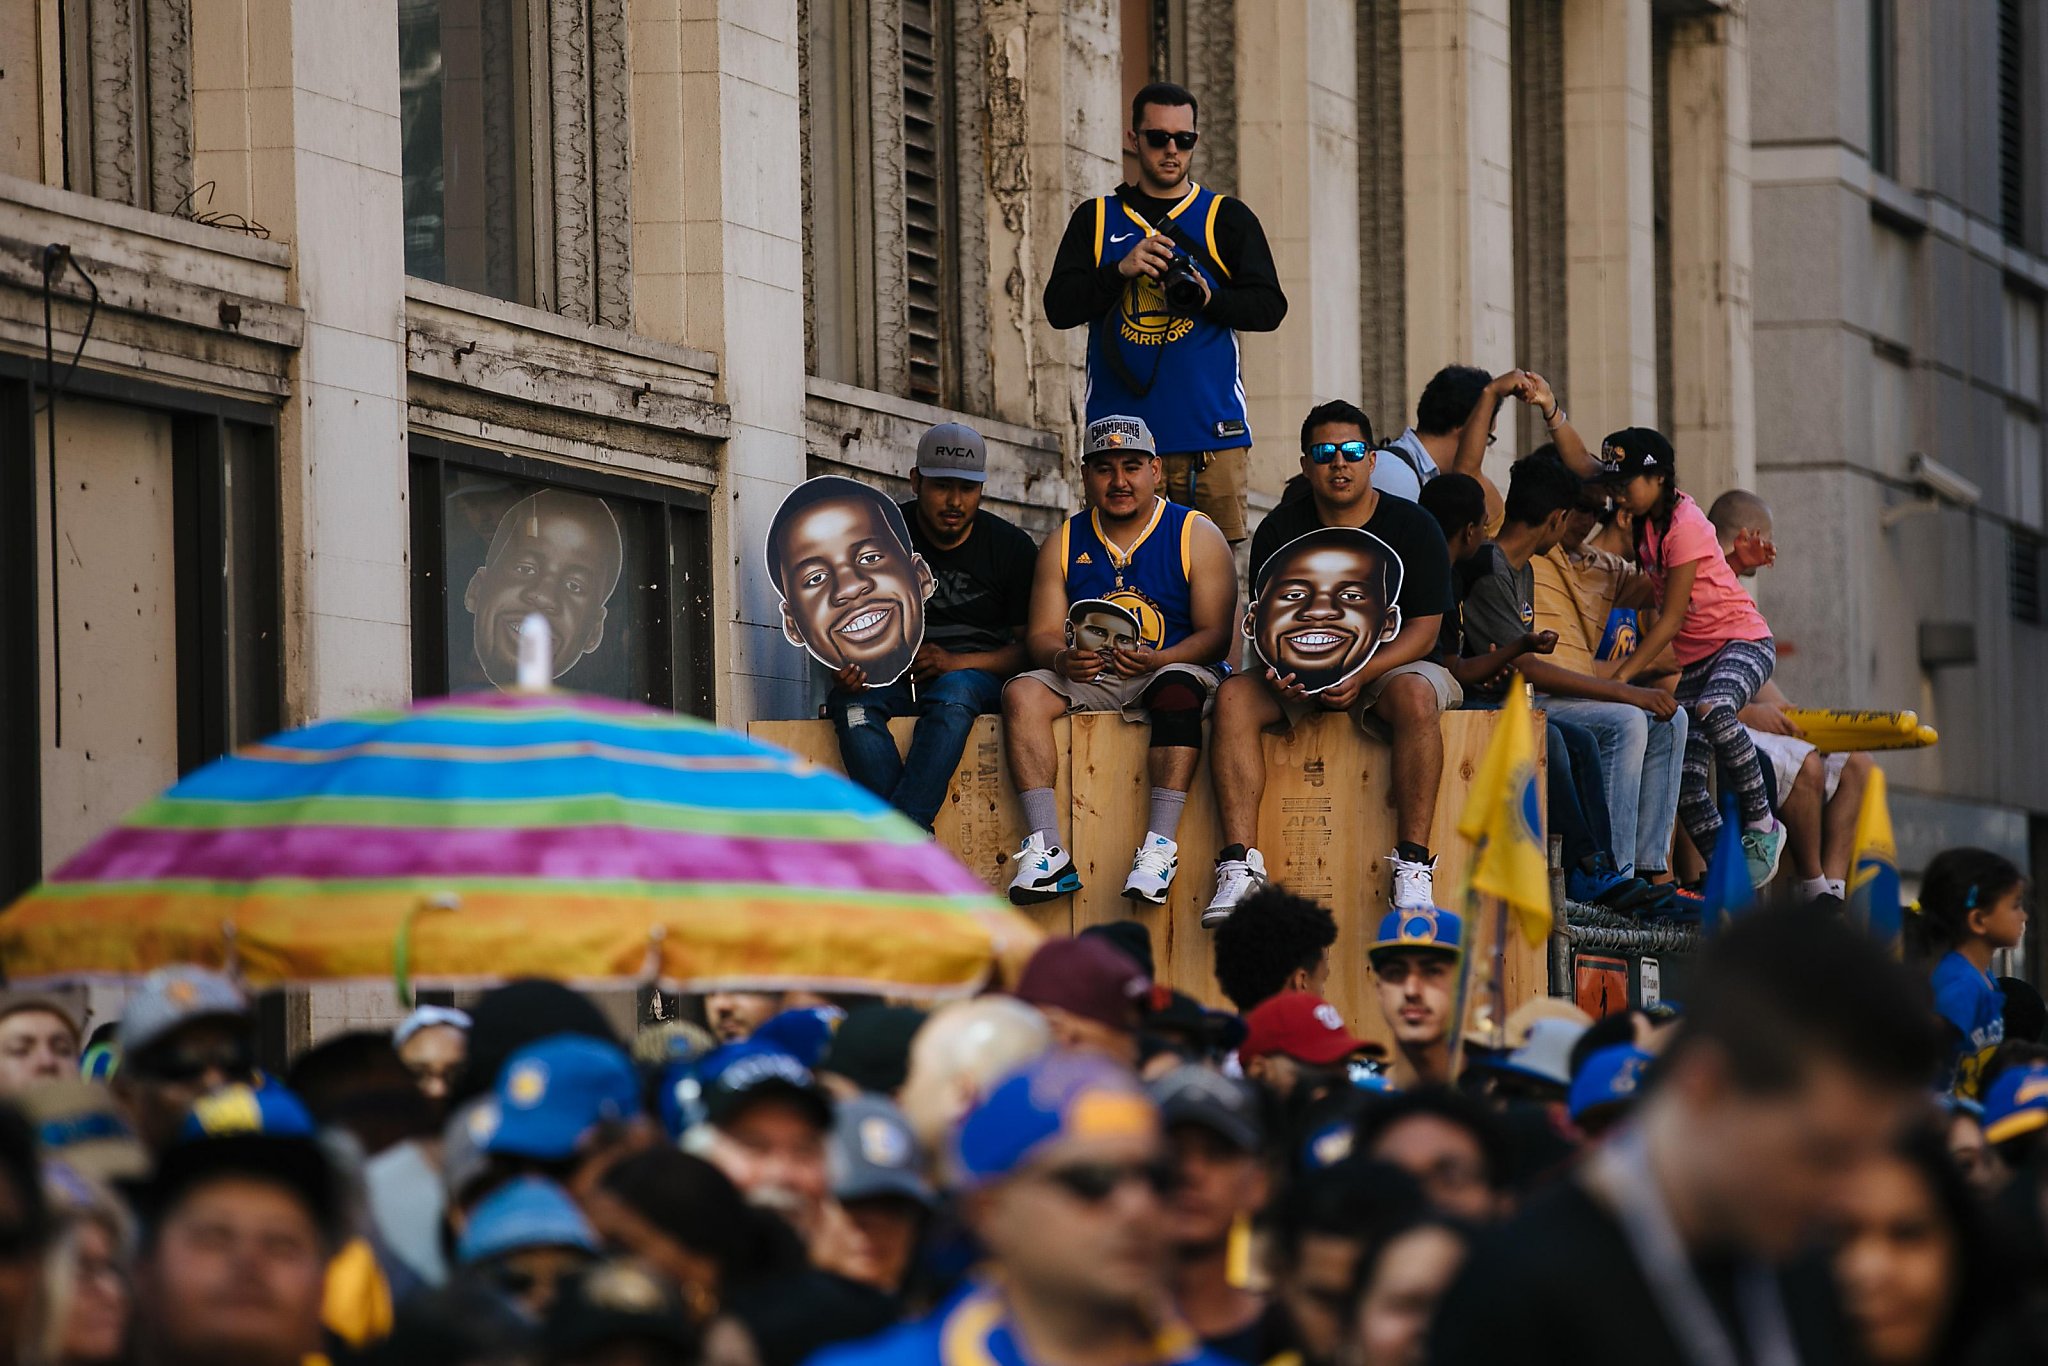 I'm tired. I want to go eat a sandwich': Klay Thompson ends Warriors parade  in classic style